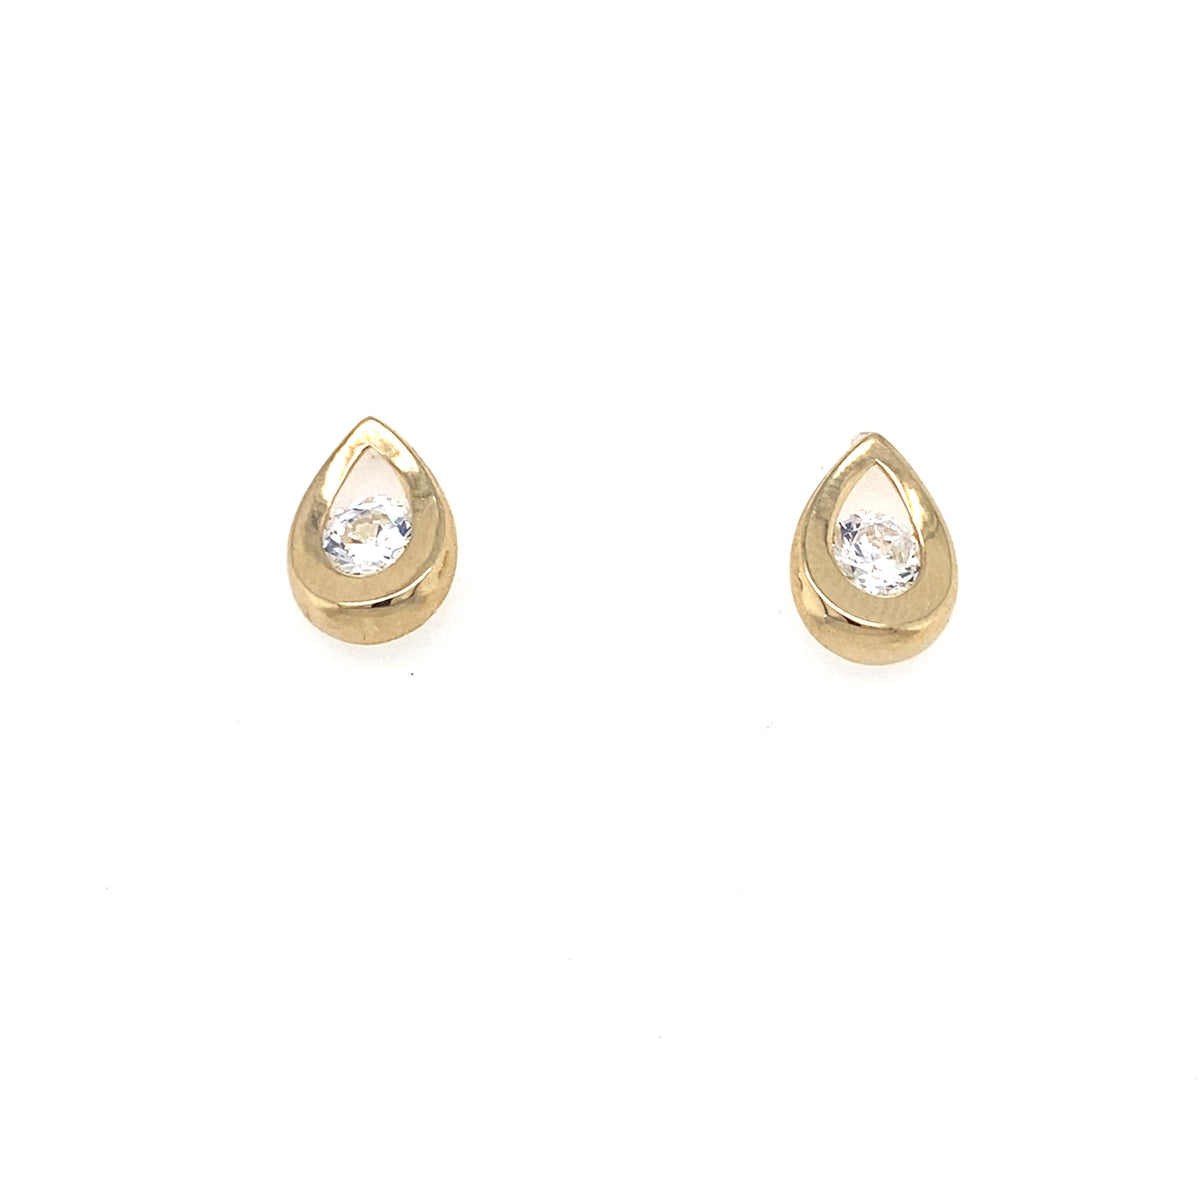 9kt Gold Pear Shaped Earrings with Clear Stone